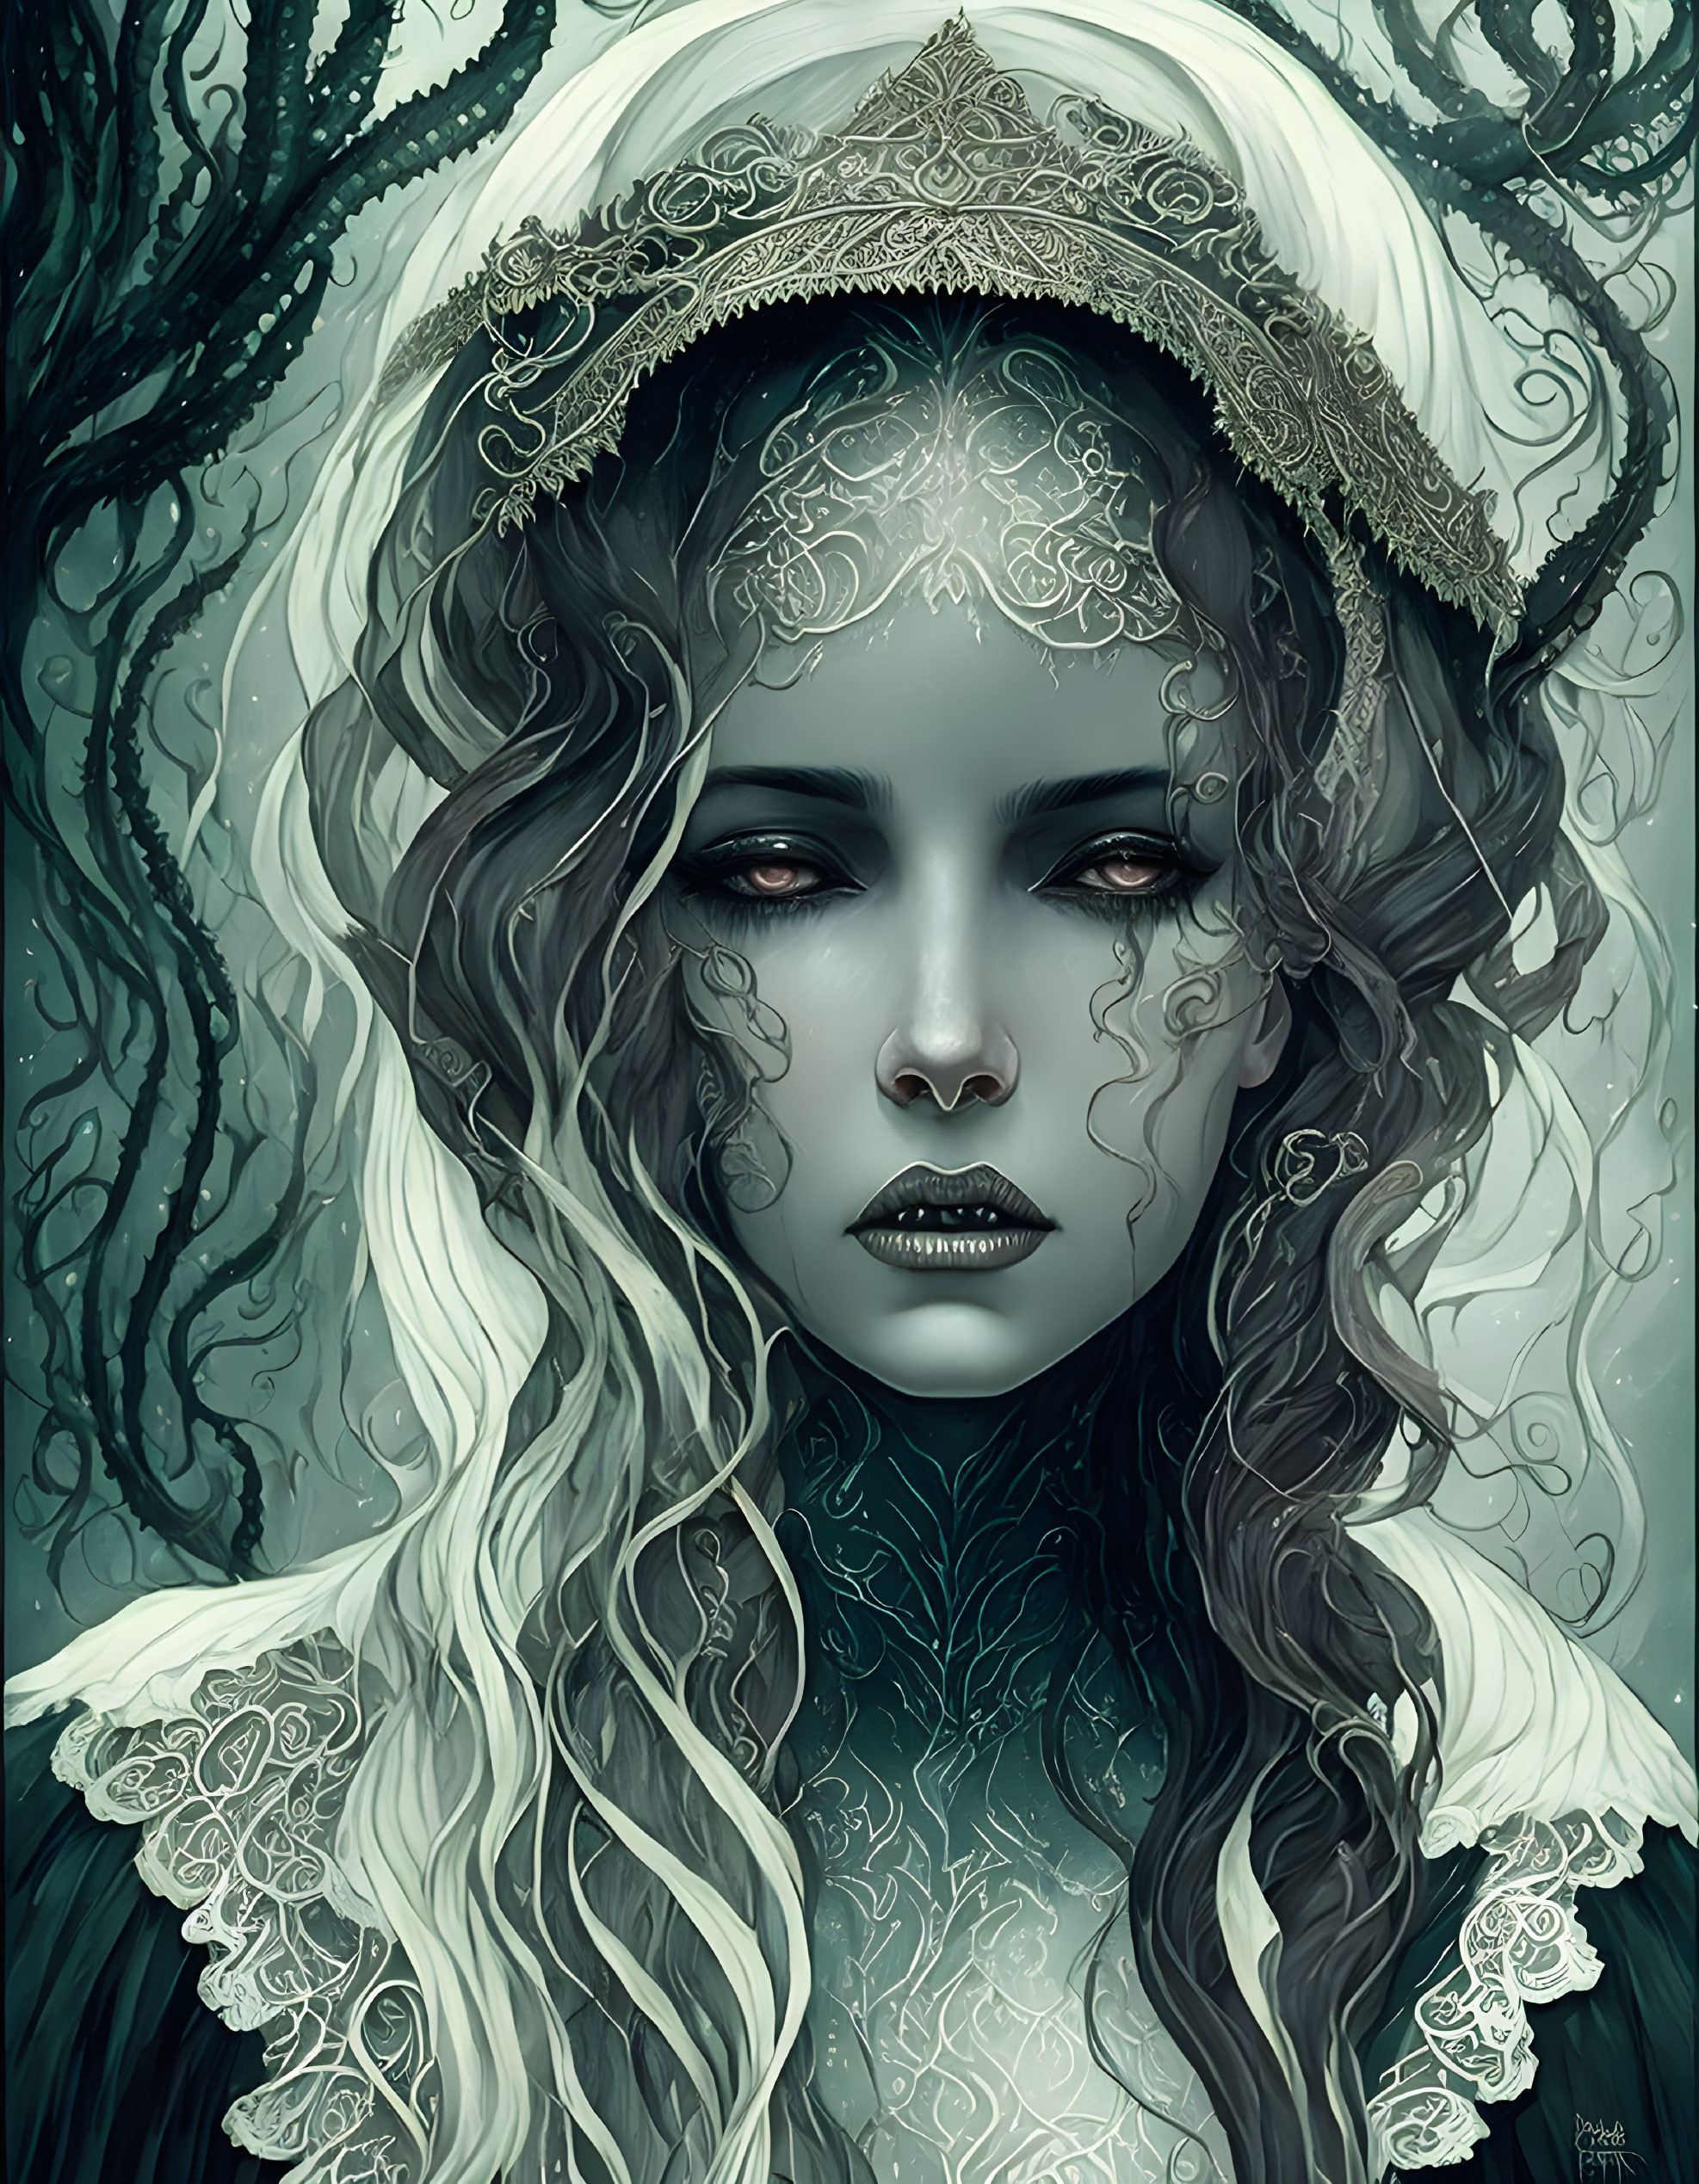 Pale-skinned woman with dark lips and crown in botanical setting